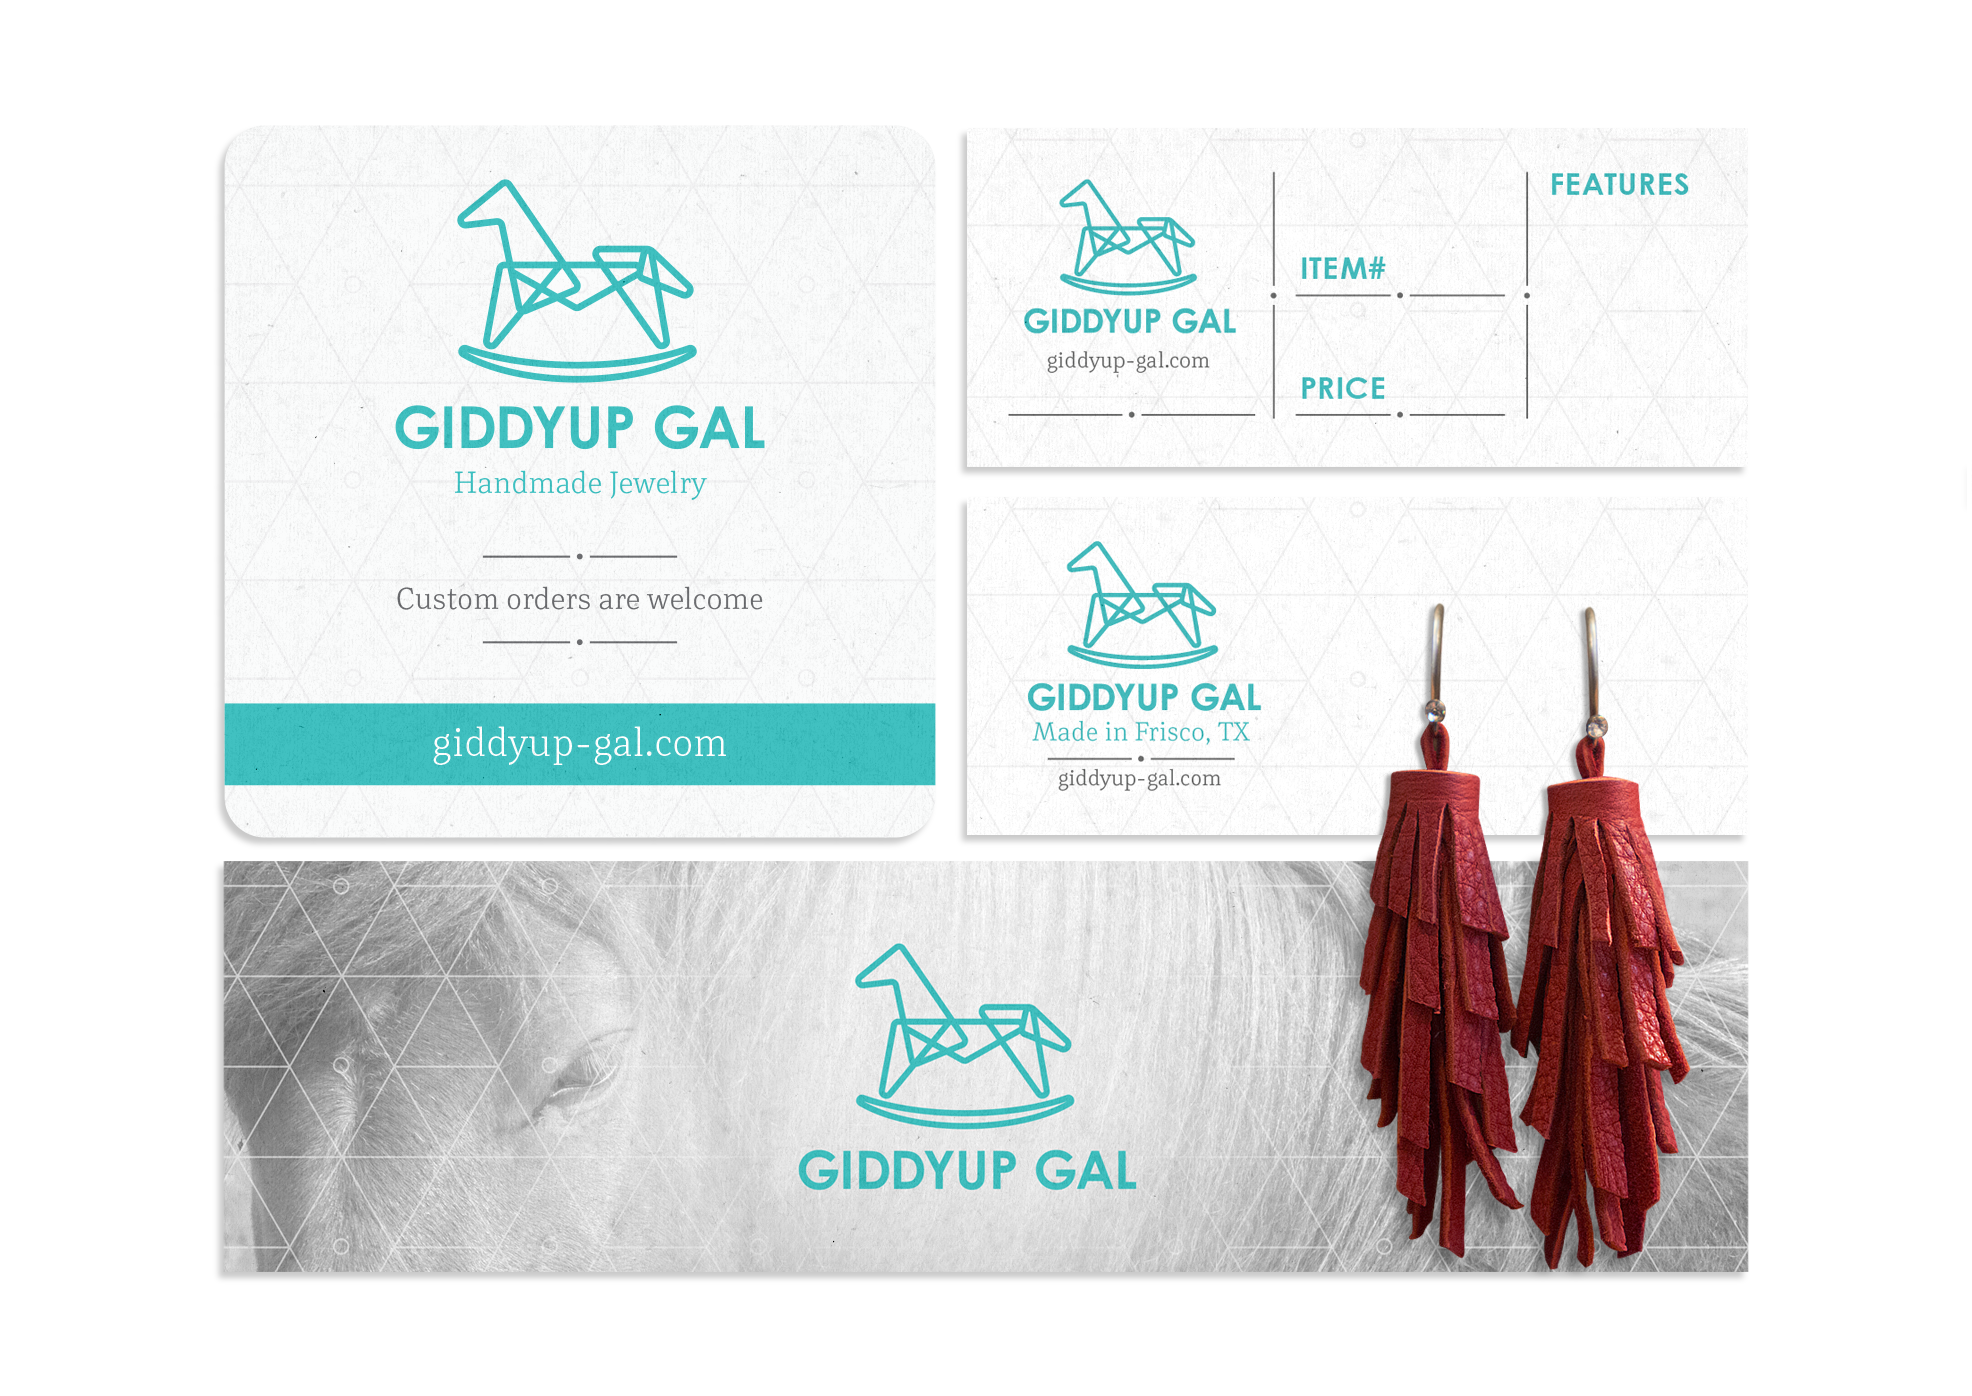  Branding and package design for Giddyup Gal, a jewlery and accessory designer in Frisco, Texas 